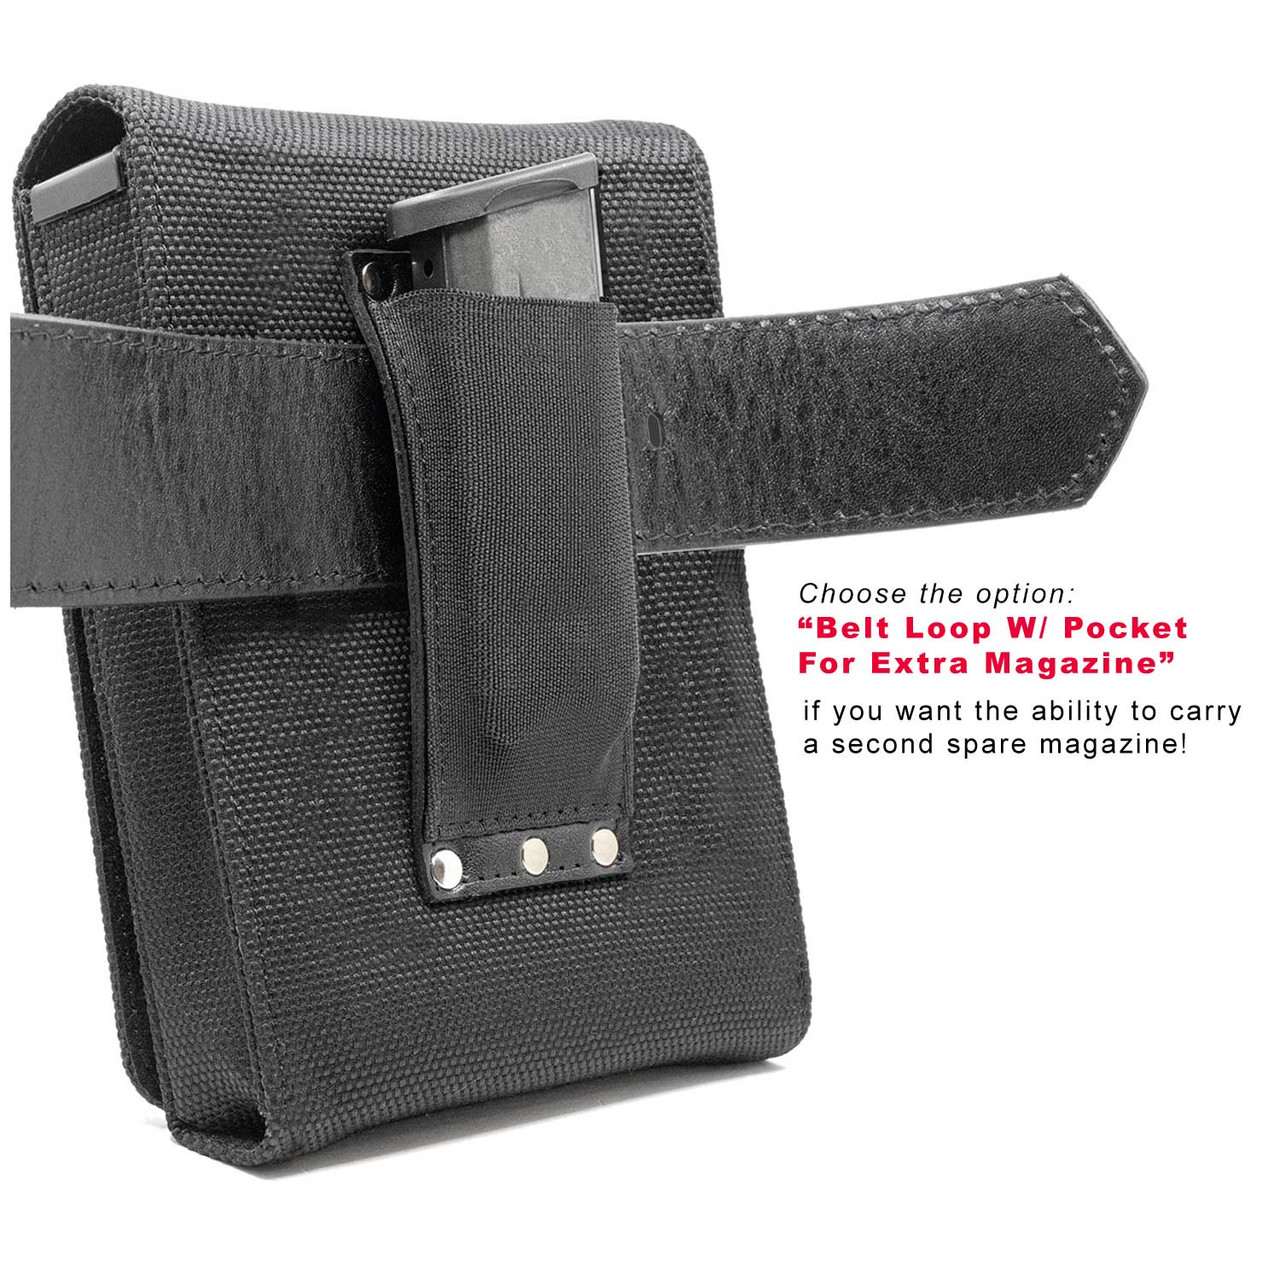 The Kimber Ultra Carry Xtra Mag Black Leather Holster